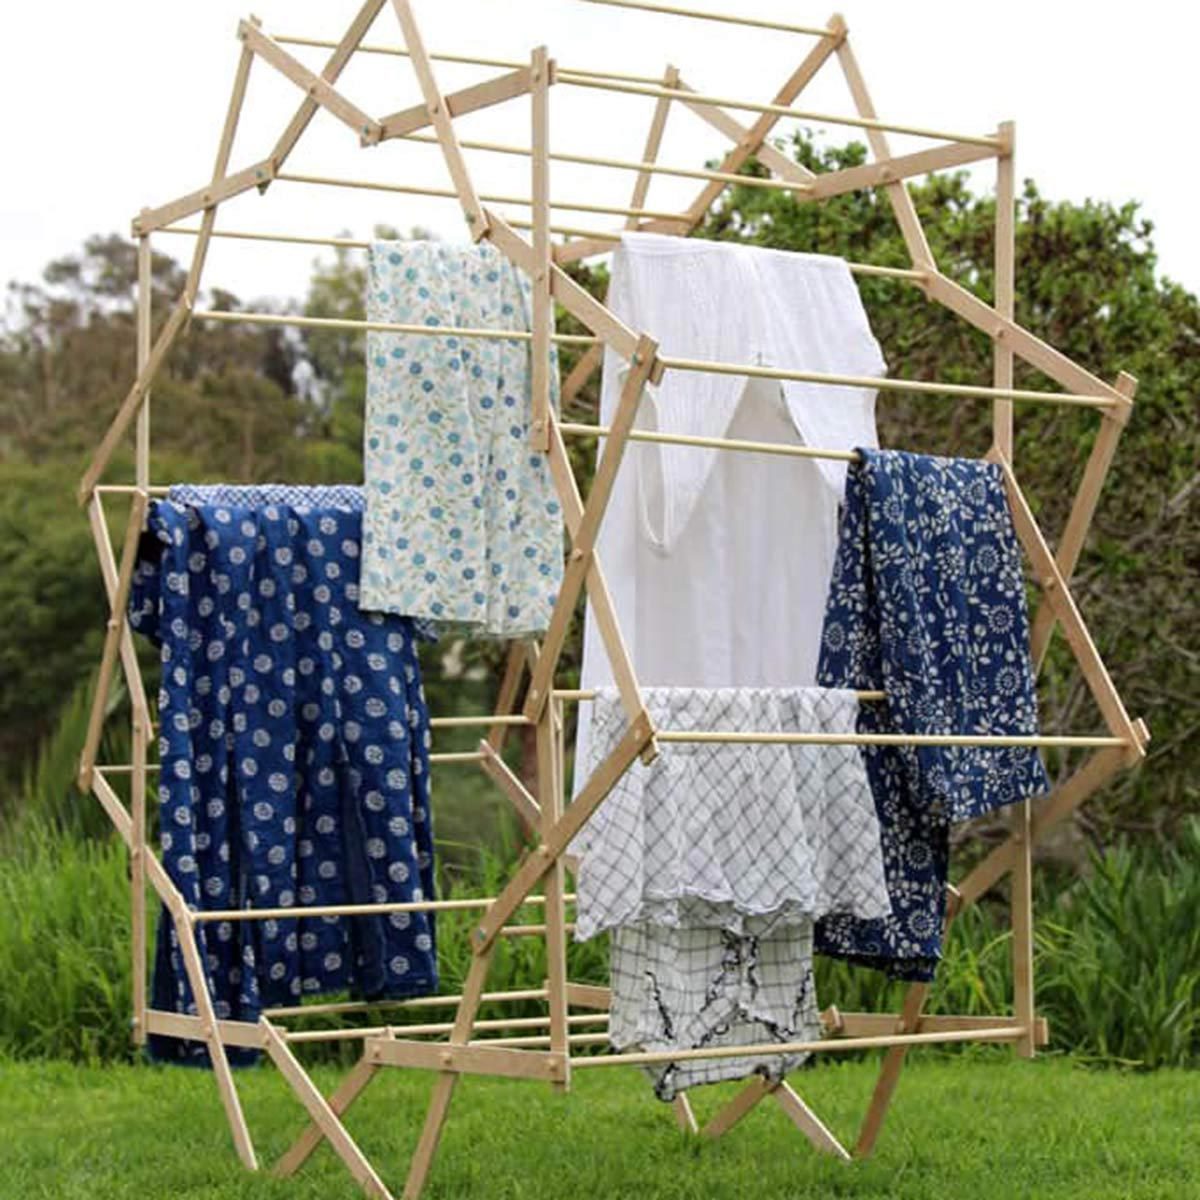 How to Use Drying Racks in Many Different Ways